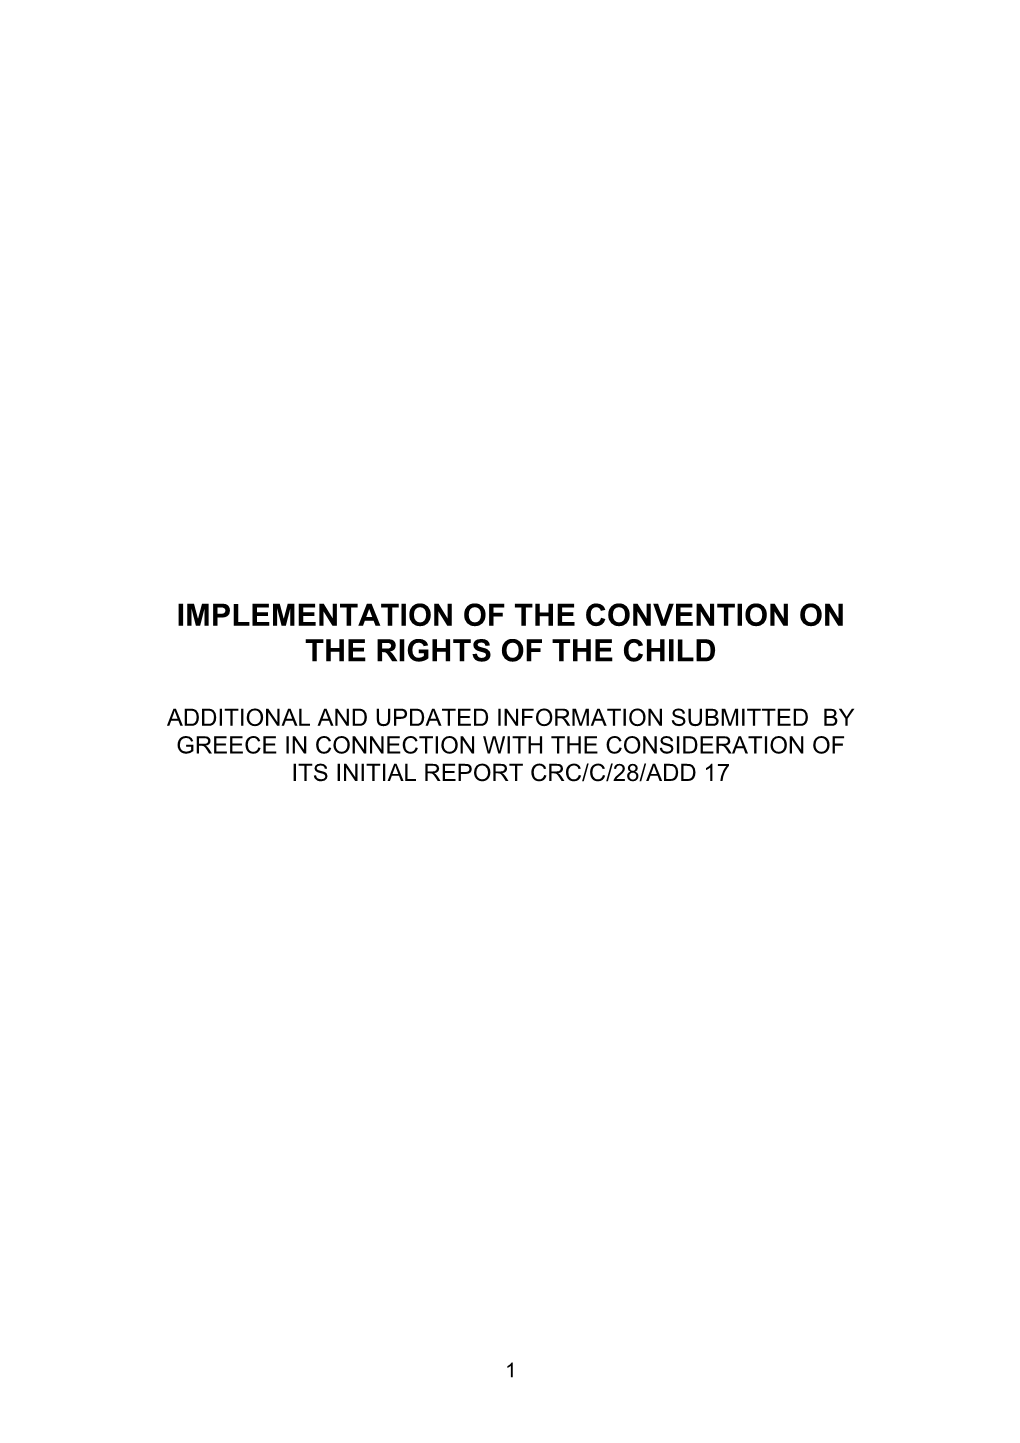 Implementation of the Convention on the Rights of the Child